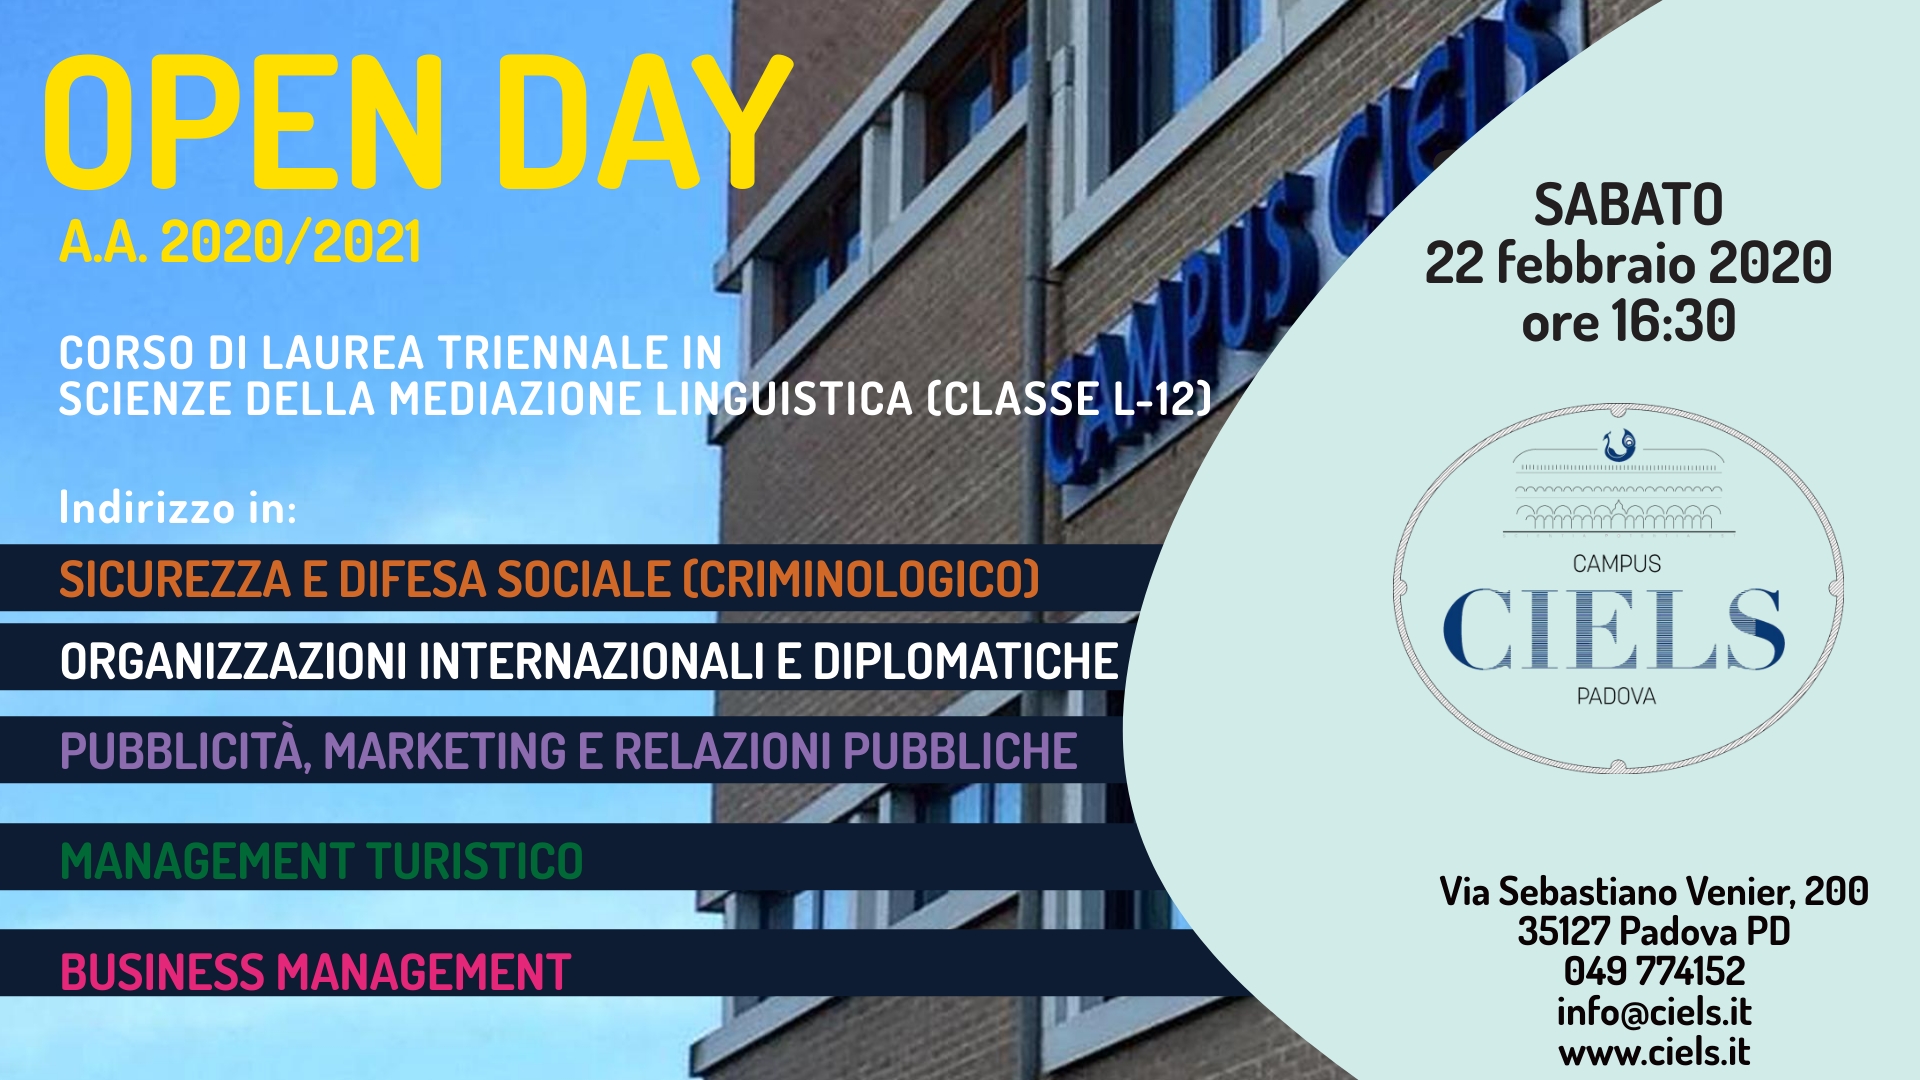 Open Day Campus Ciels 22.02.2020 PD